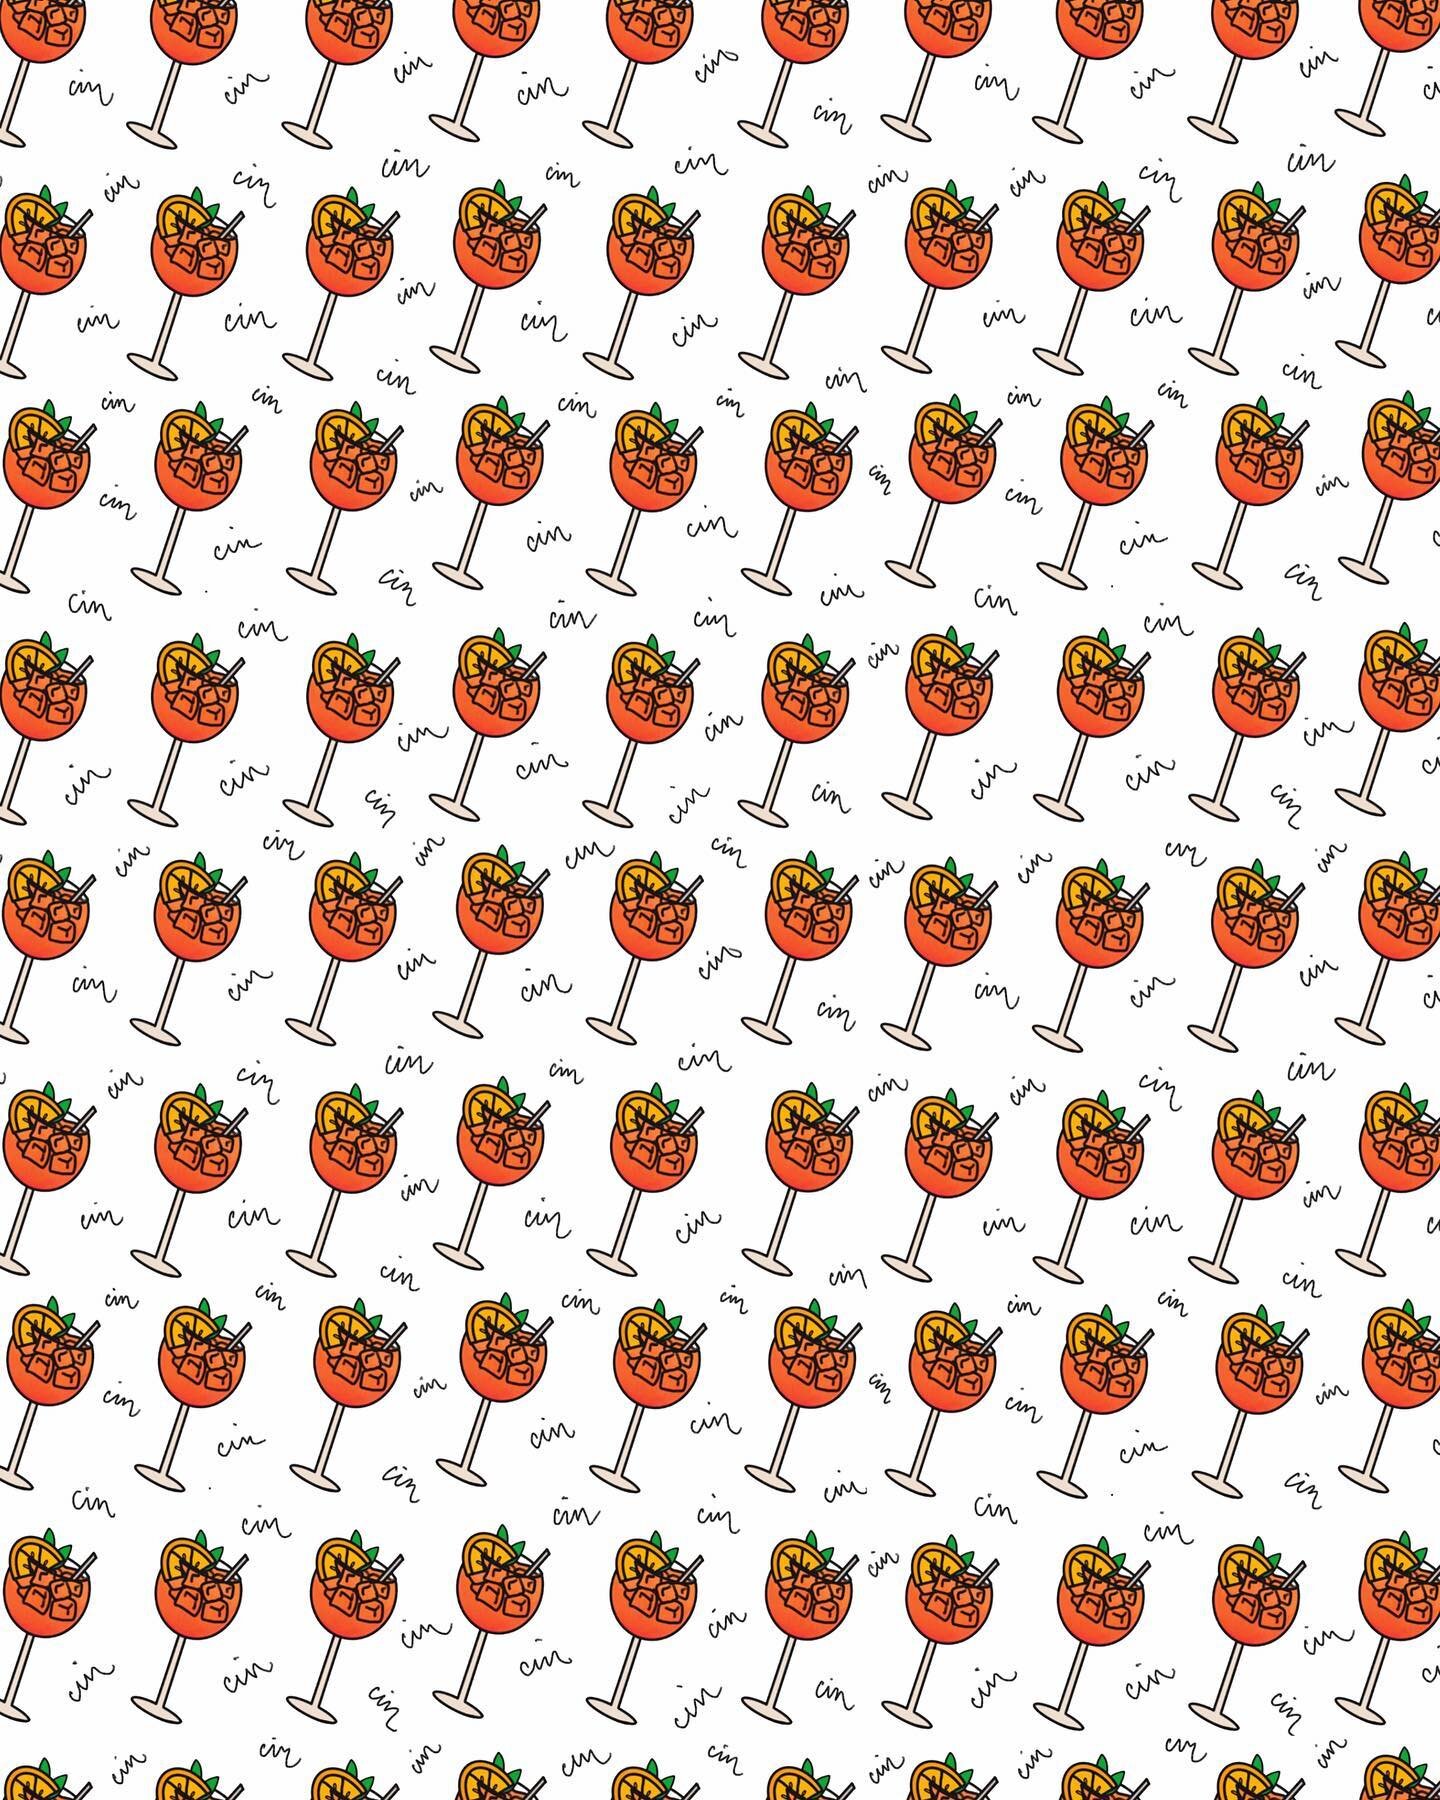 Working on a lot of new patterns for my art licensing portfolio! So fun to repurpose these aperol glasses 🍹🍾🧡 Uploaded to my Society6 site for new swag 😍: https://society6.com/everydaydetaildoodles/all?sort=new